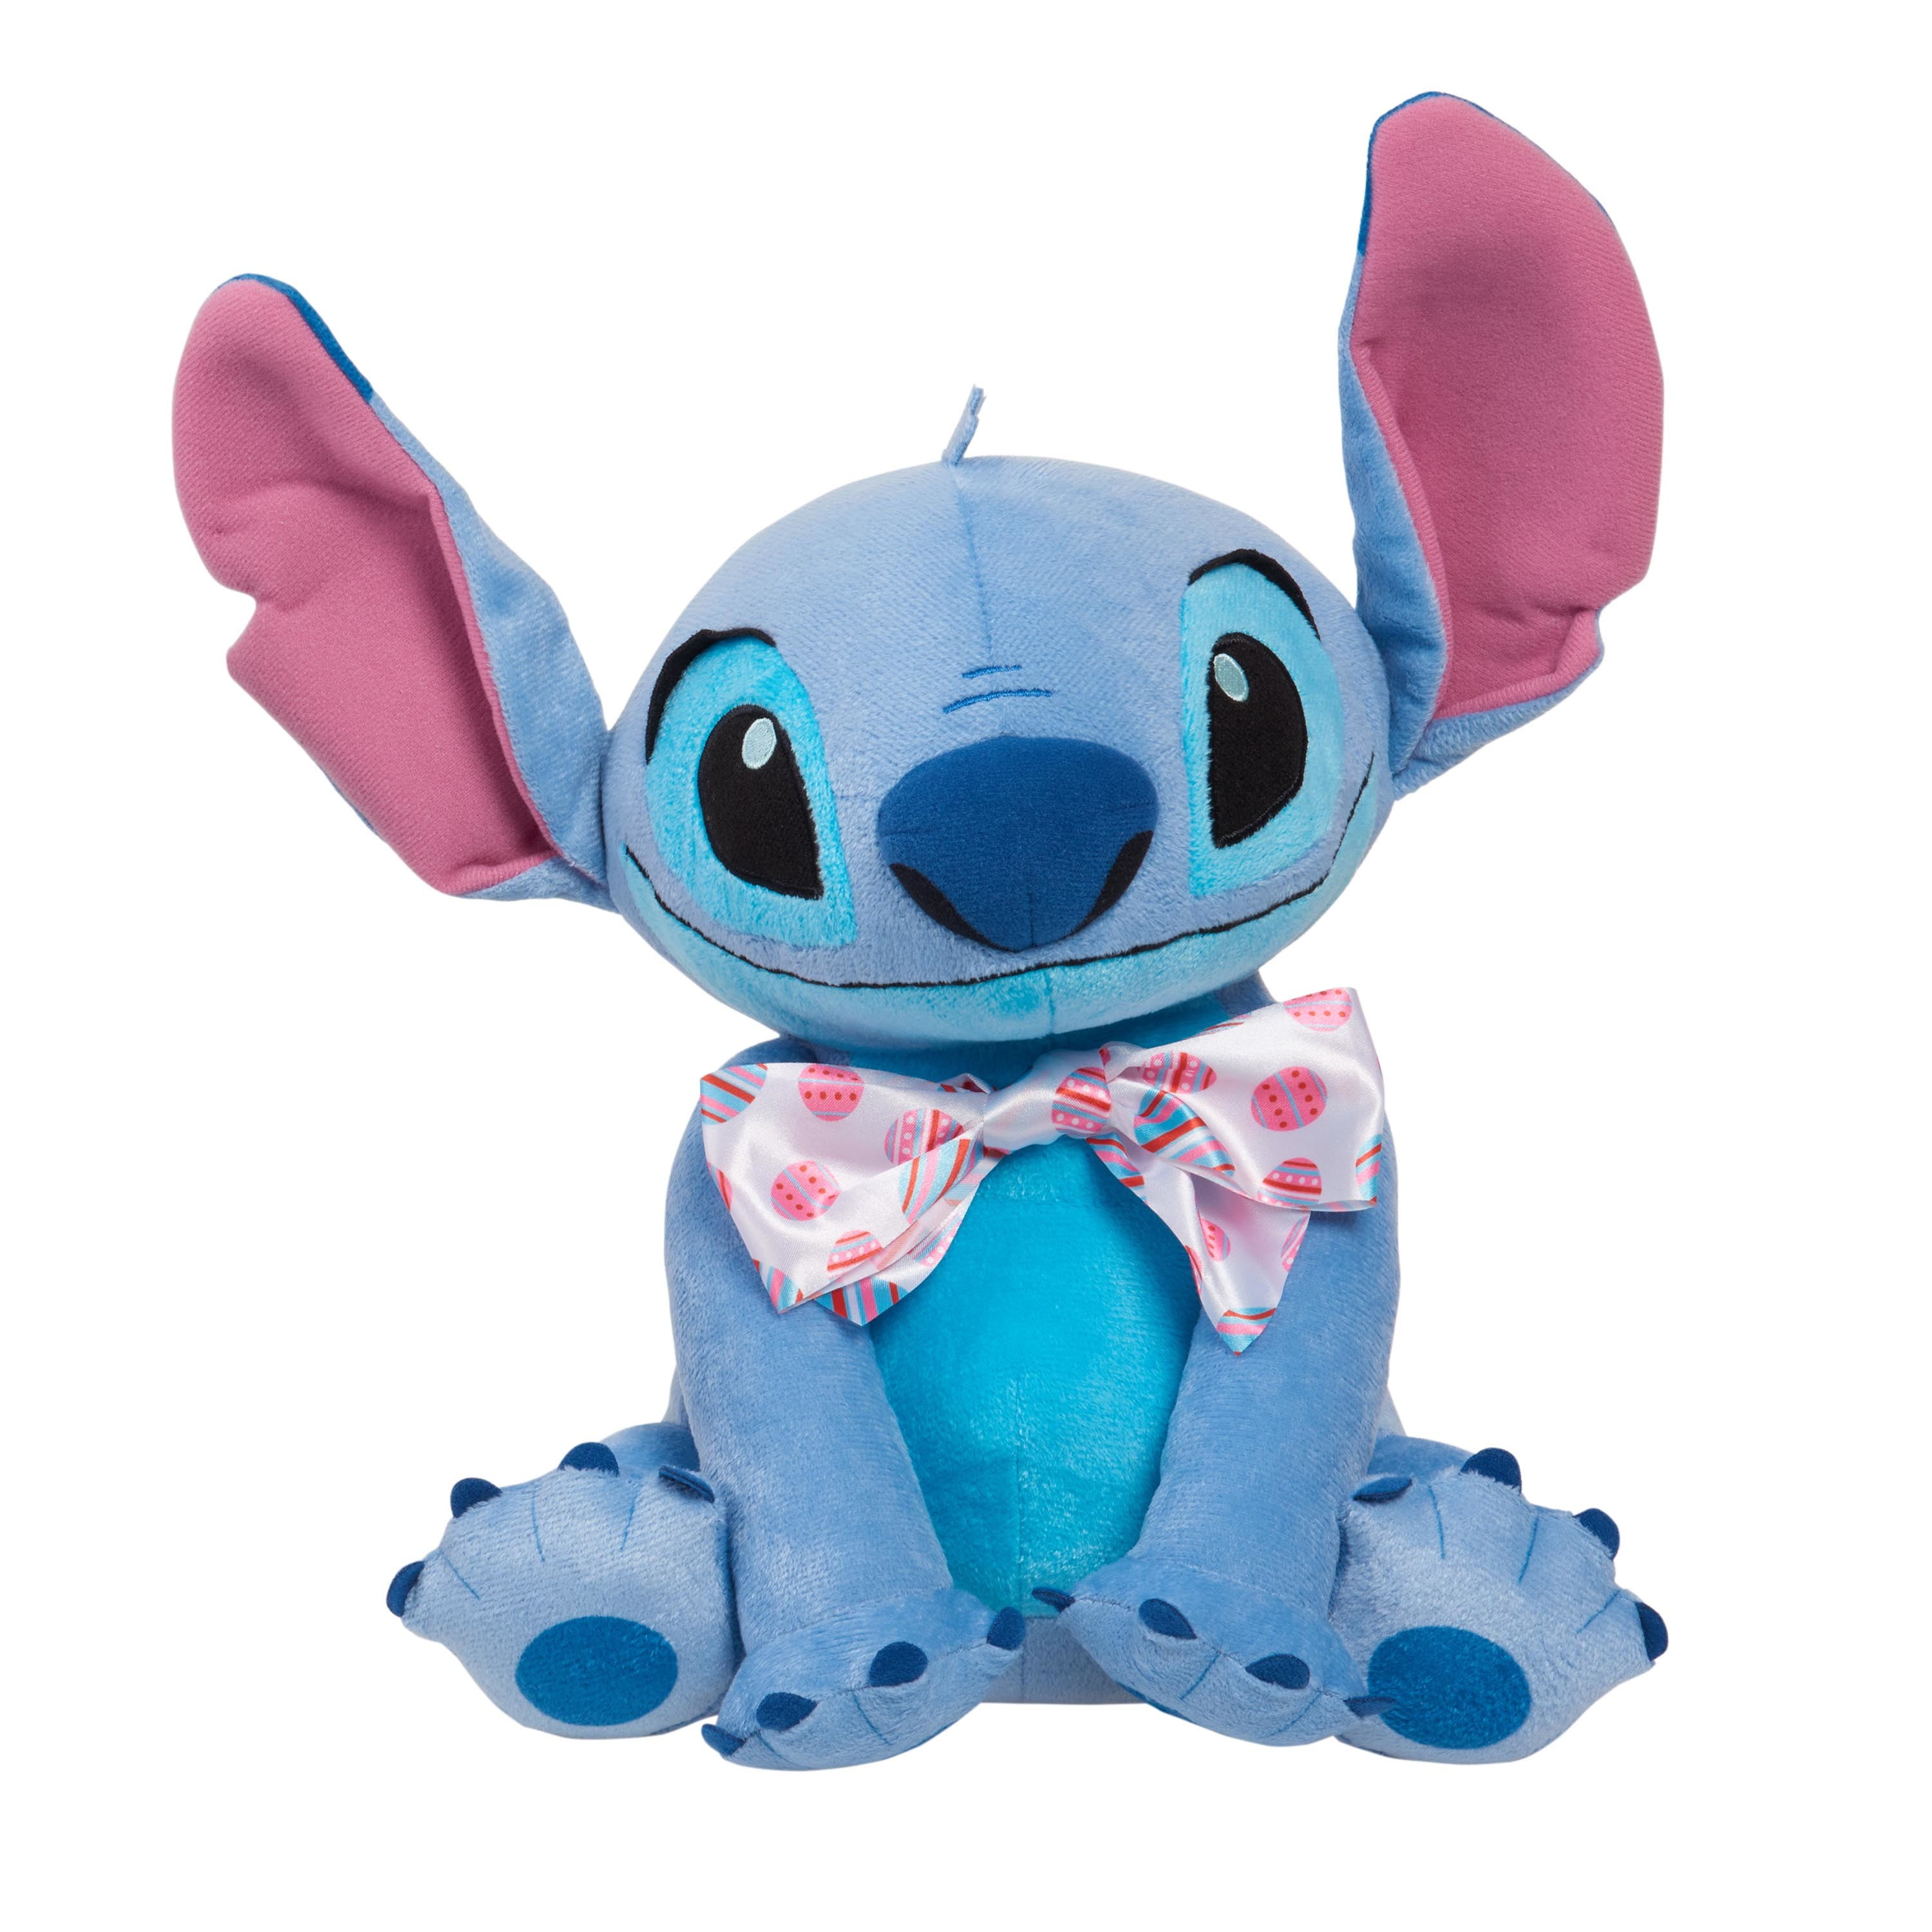 Buy Disney Stitch Today Is A Good Day Plaque for GBP 2.99